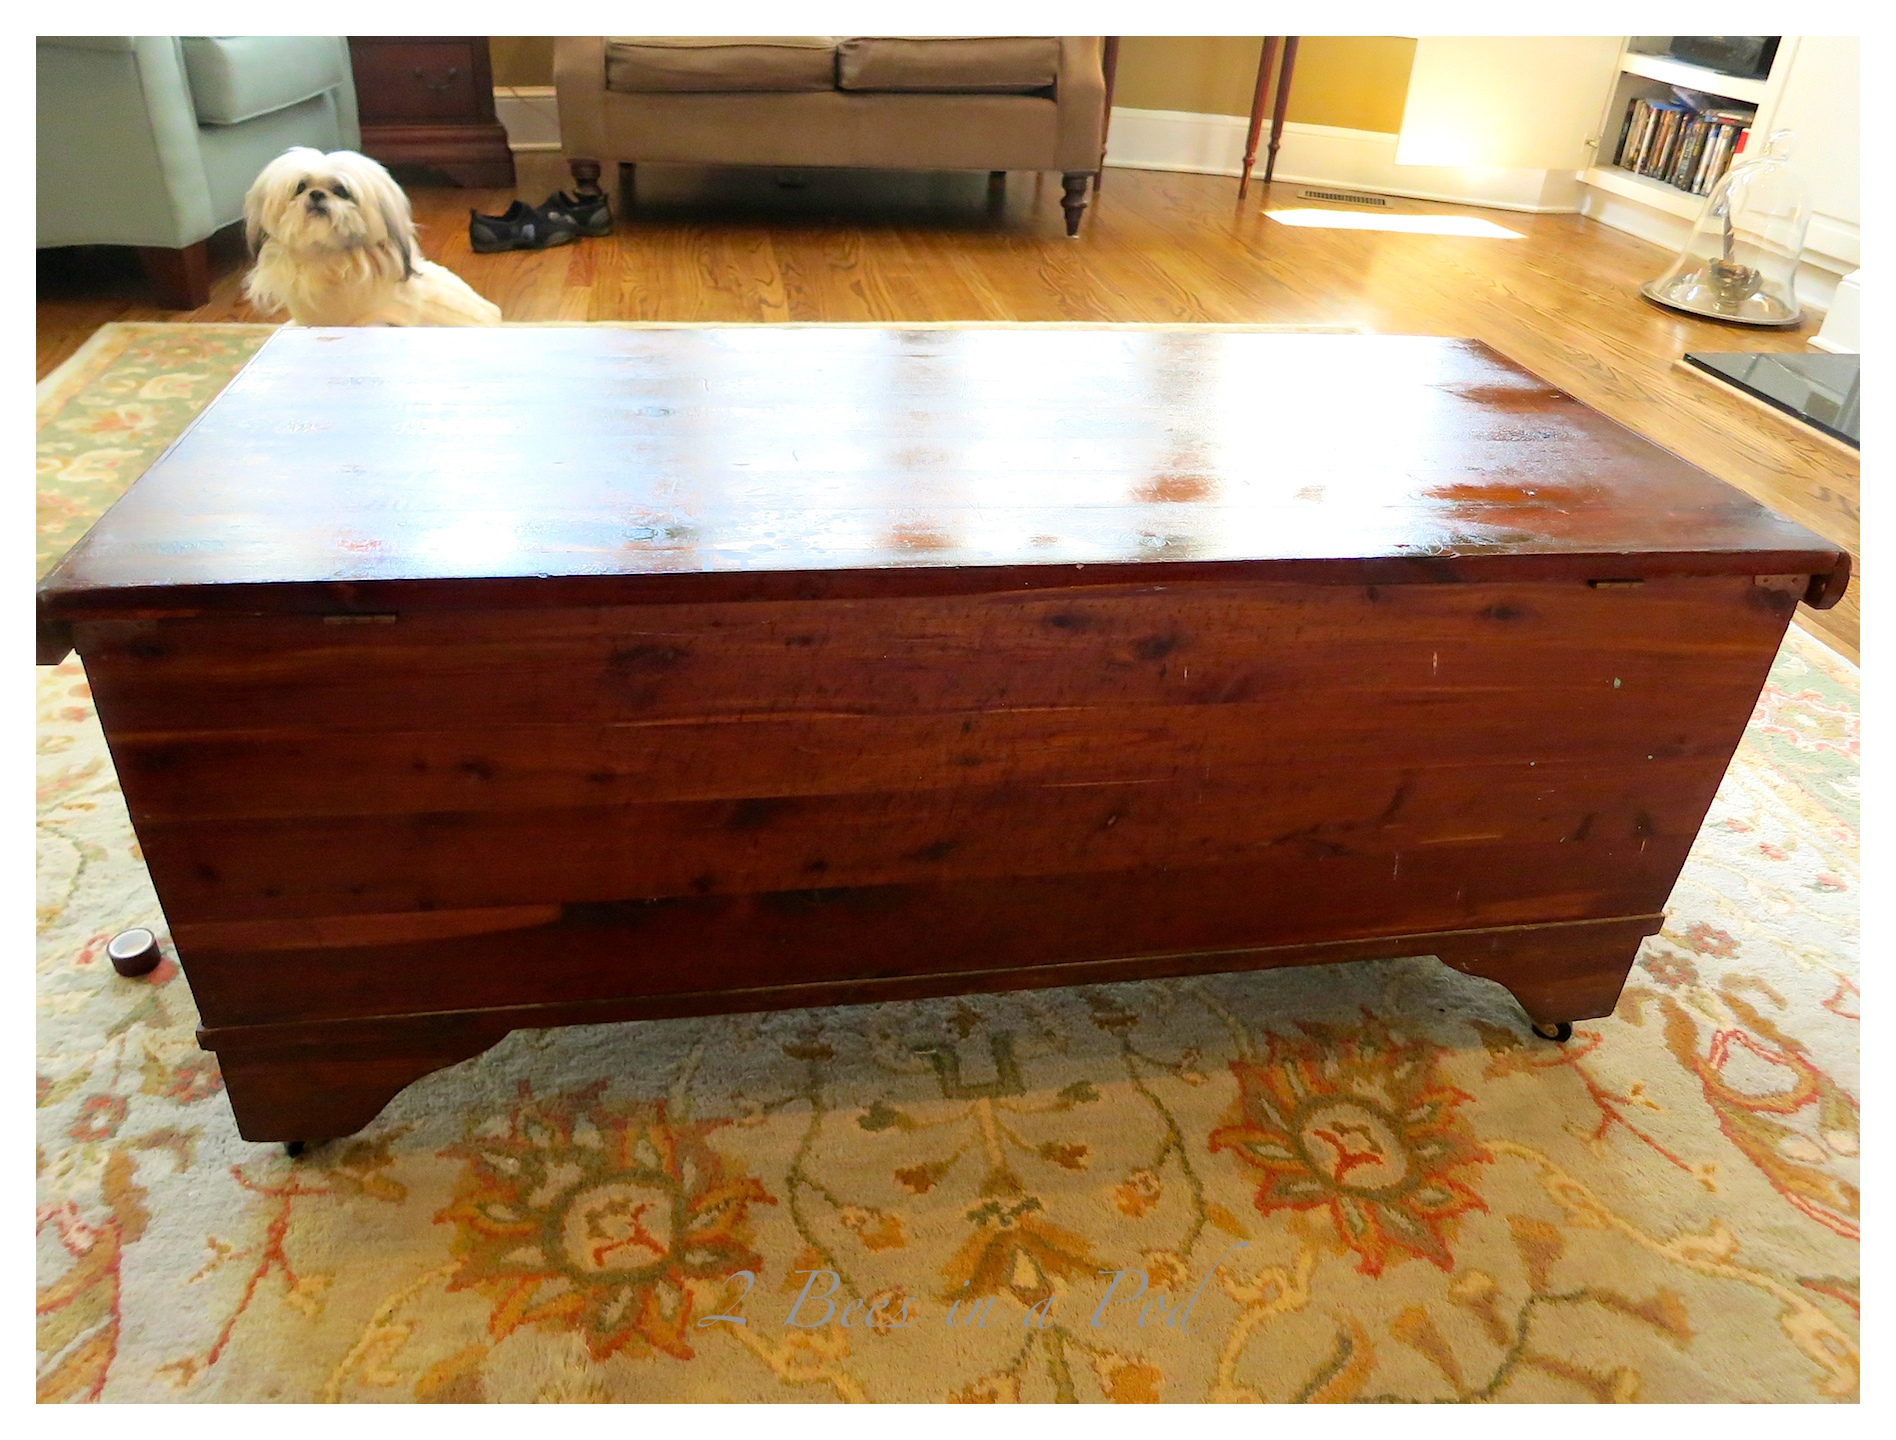 Reviving an antique vintage cedar hope chest using Old English scratch cover. Really nourishes the old wood and brings back the natural luster.